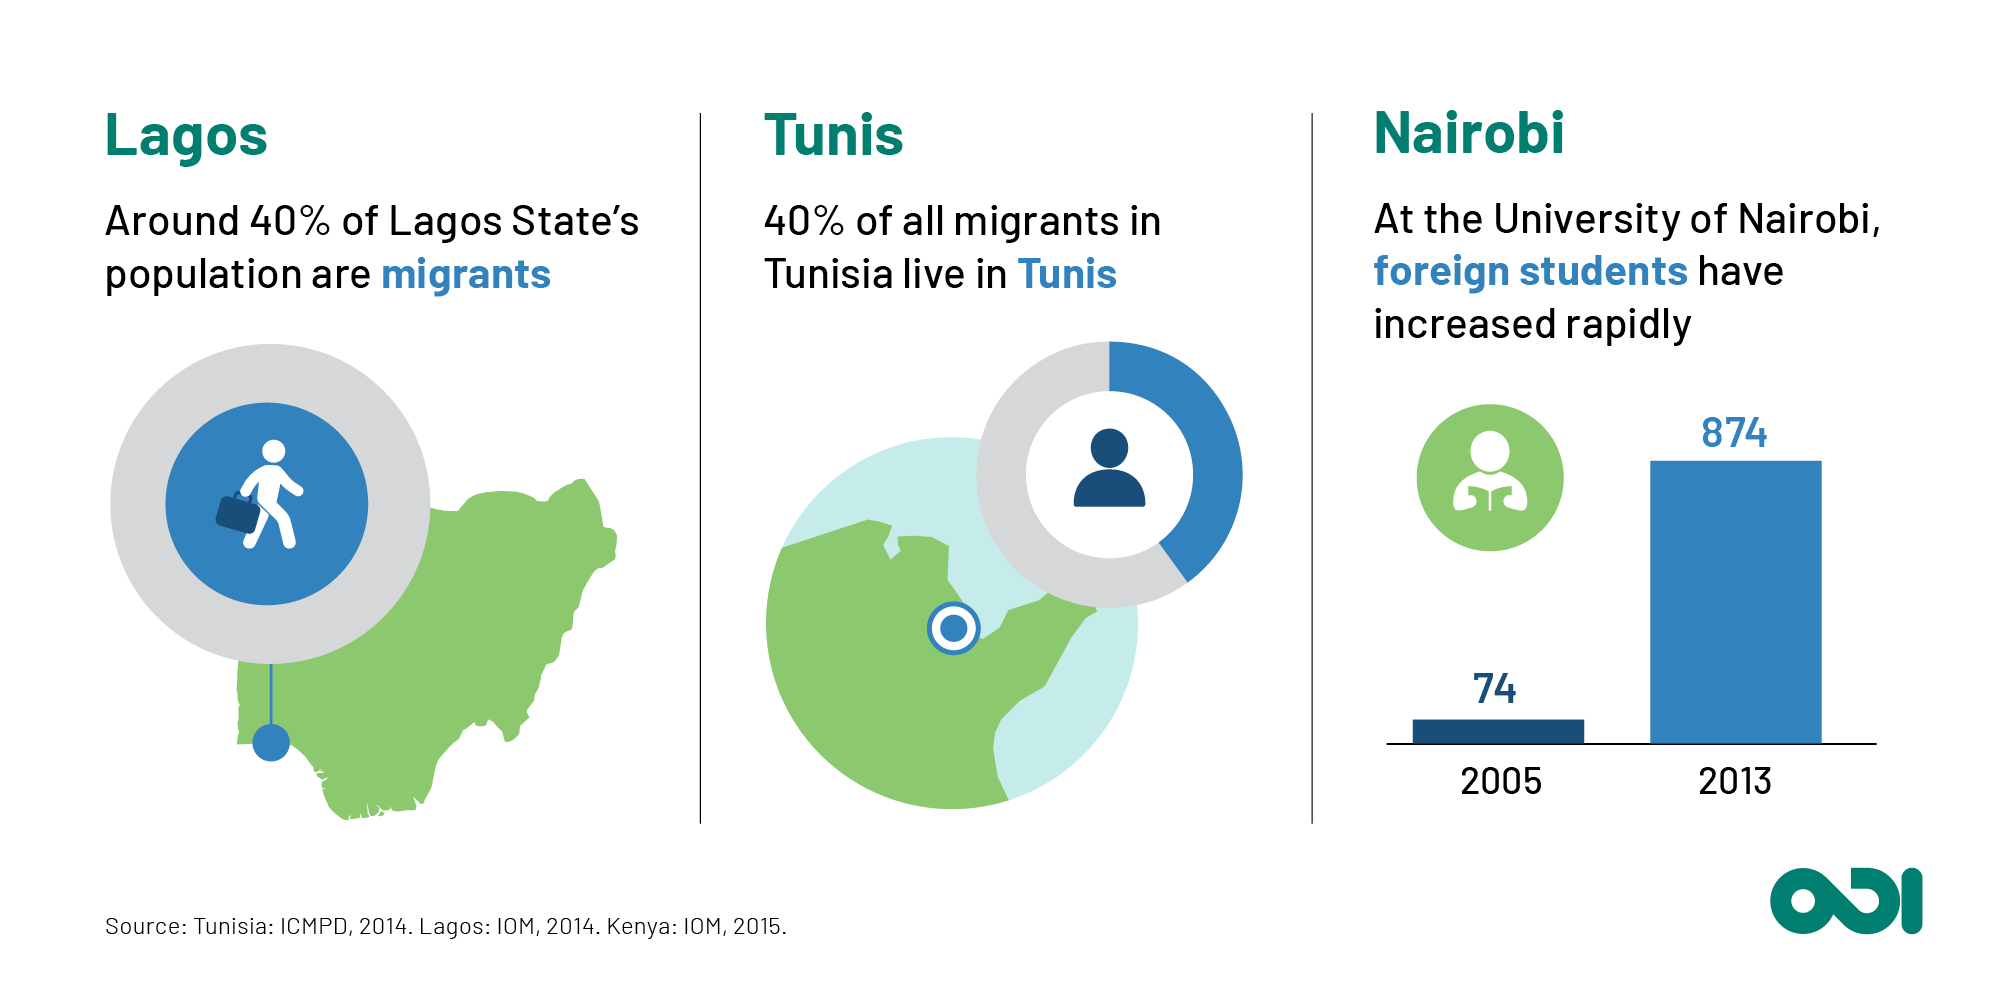 Infographic: the proportion of migrants in Lagos, Tunis and Nairobi. 